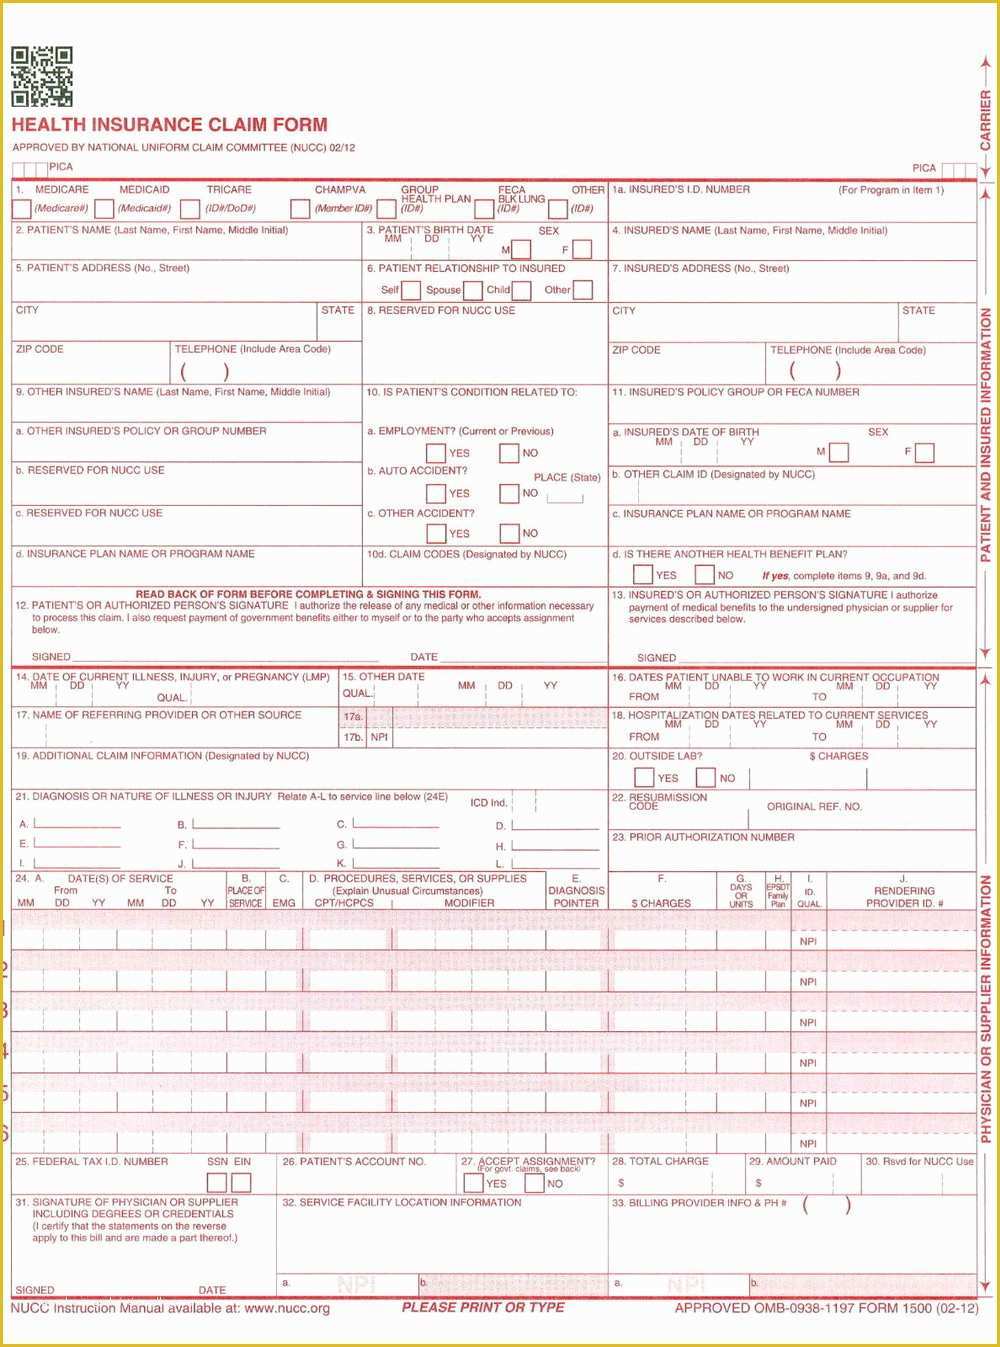 Free Cms 1500 Claim form Template Of Cms 1500 forms Free forms 4810